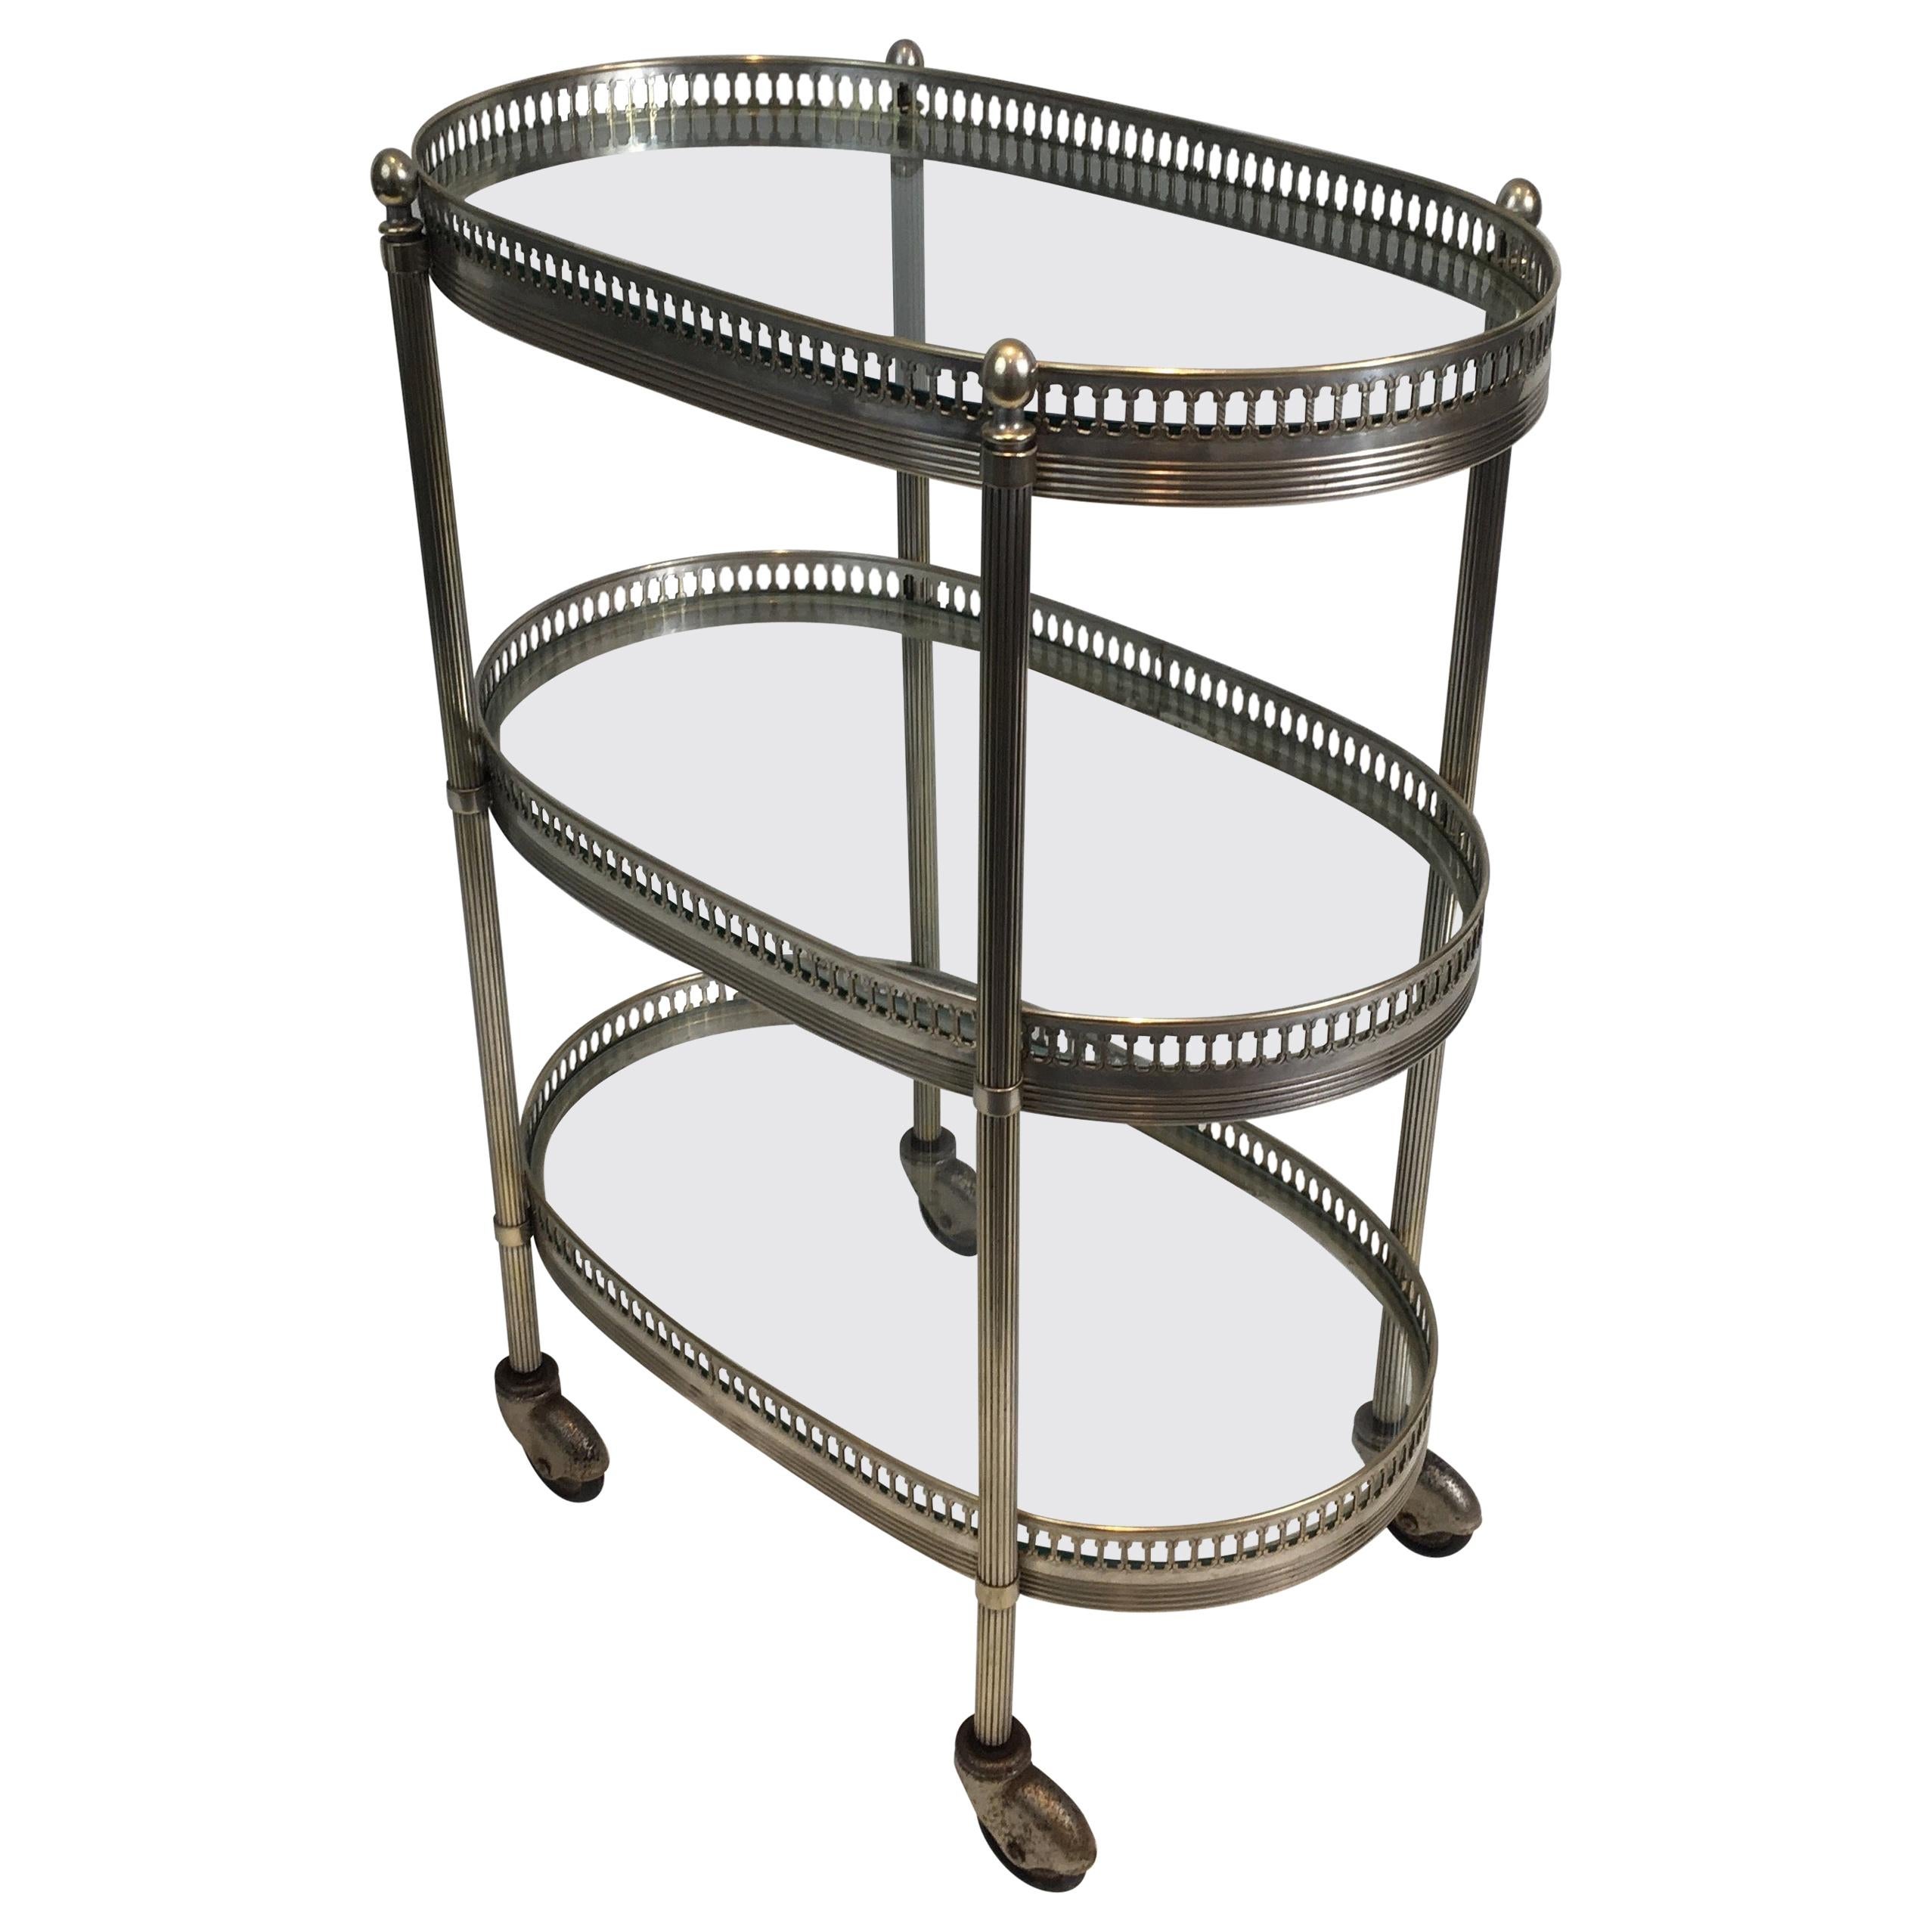 Neoclassical Oval Small Silver Plated on Brass Drinks Trolley, French